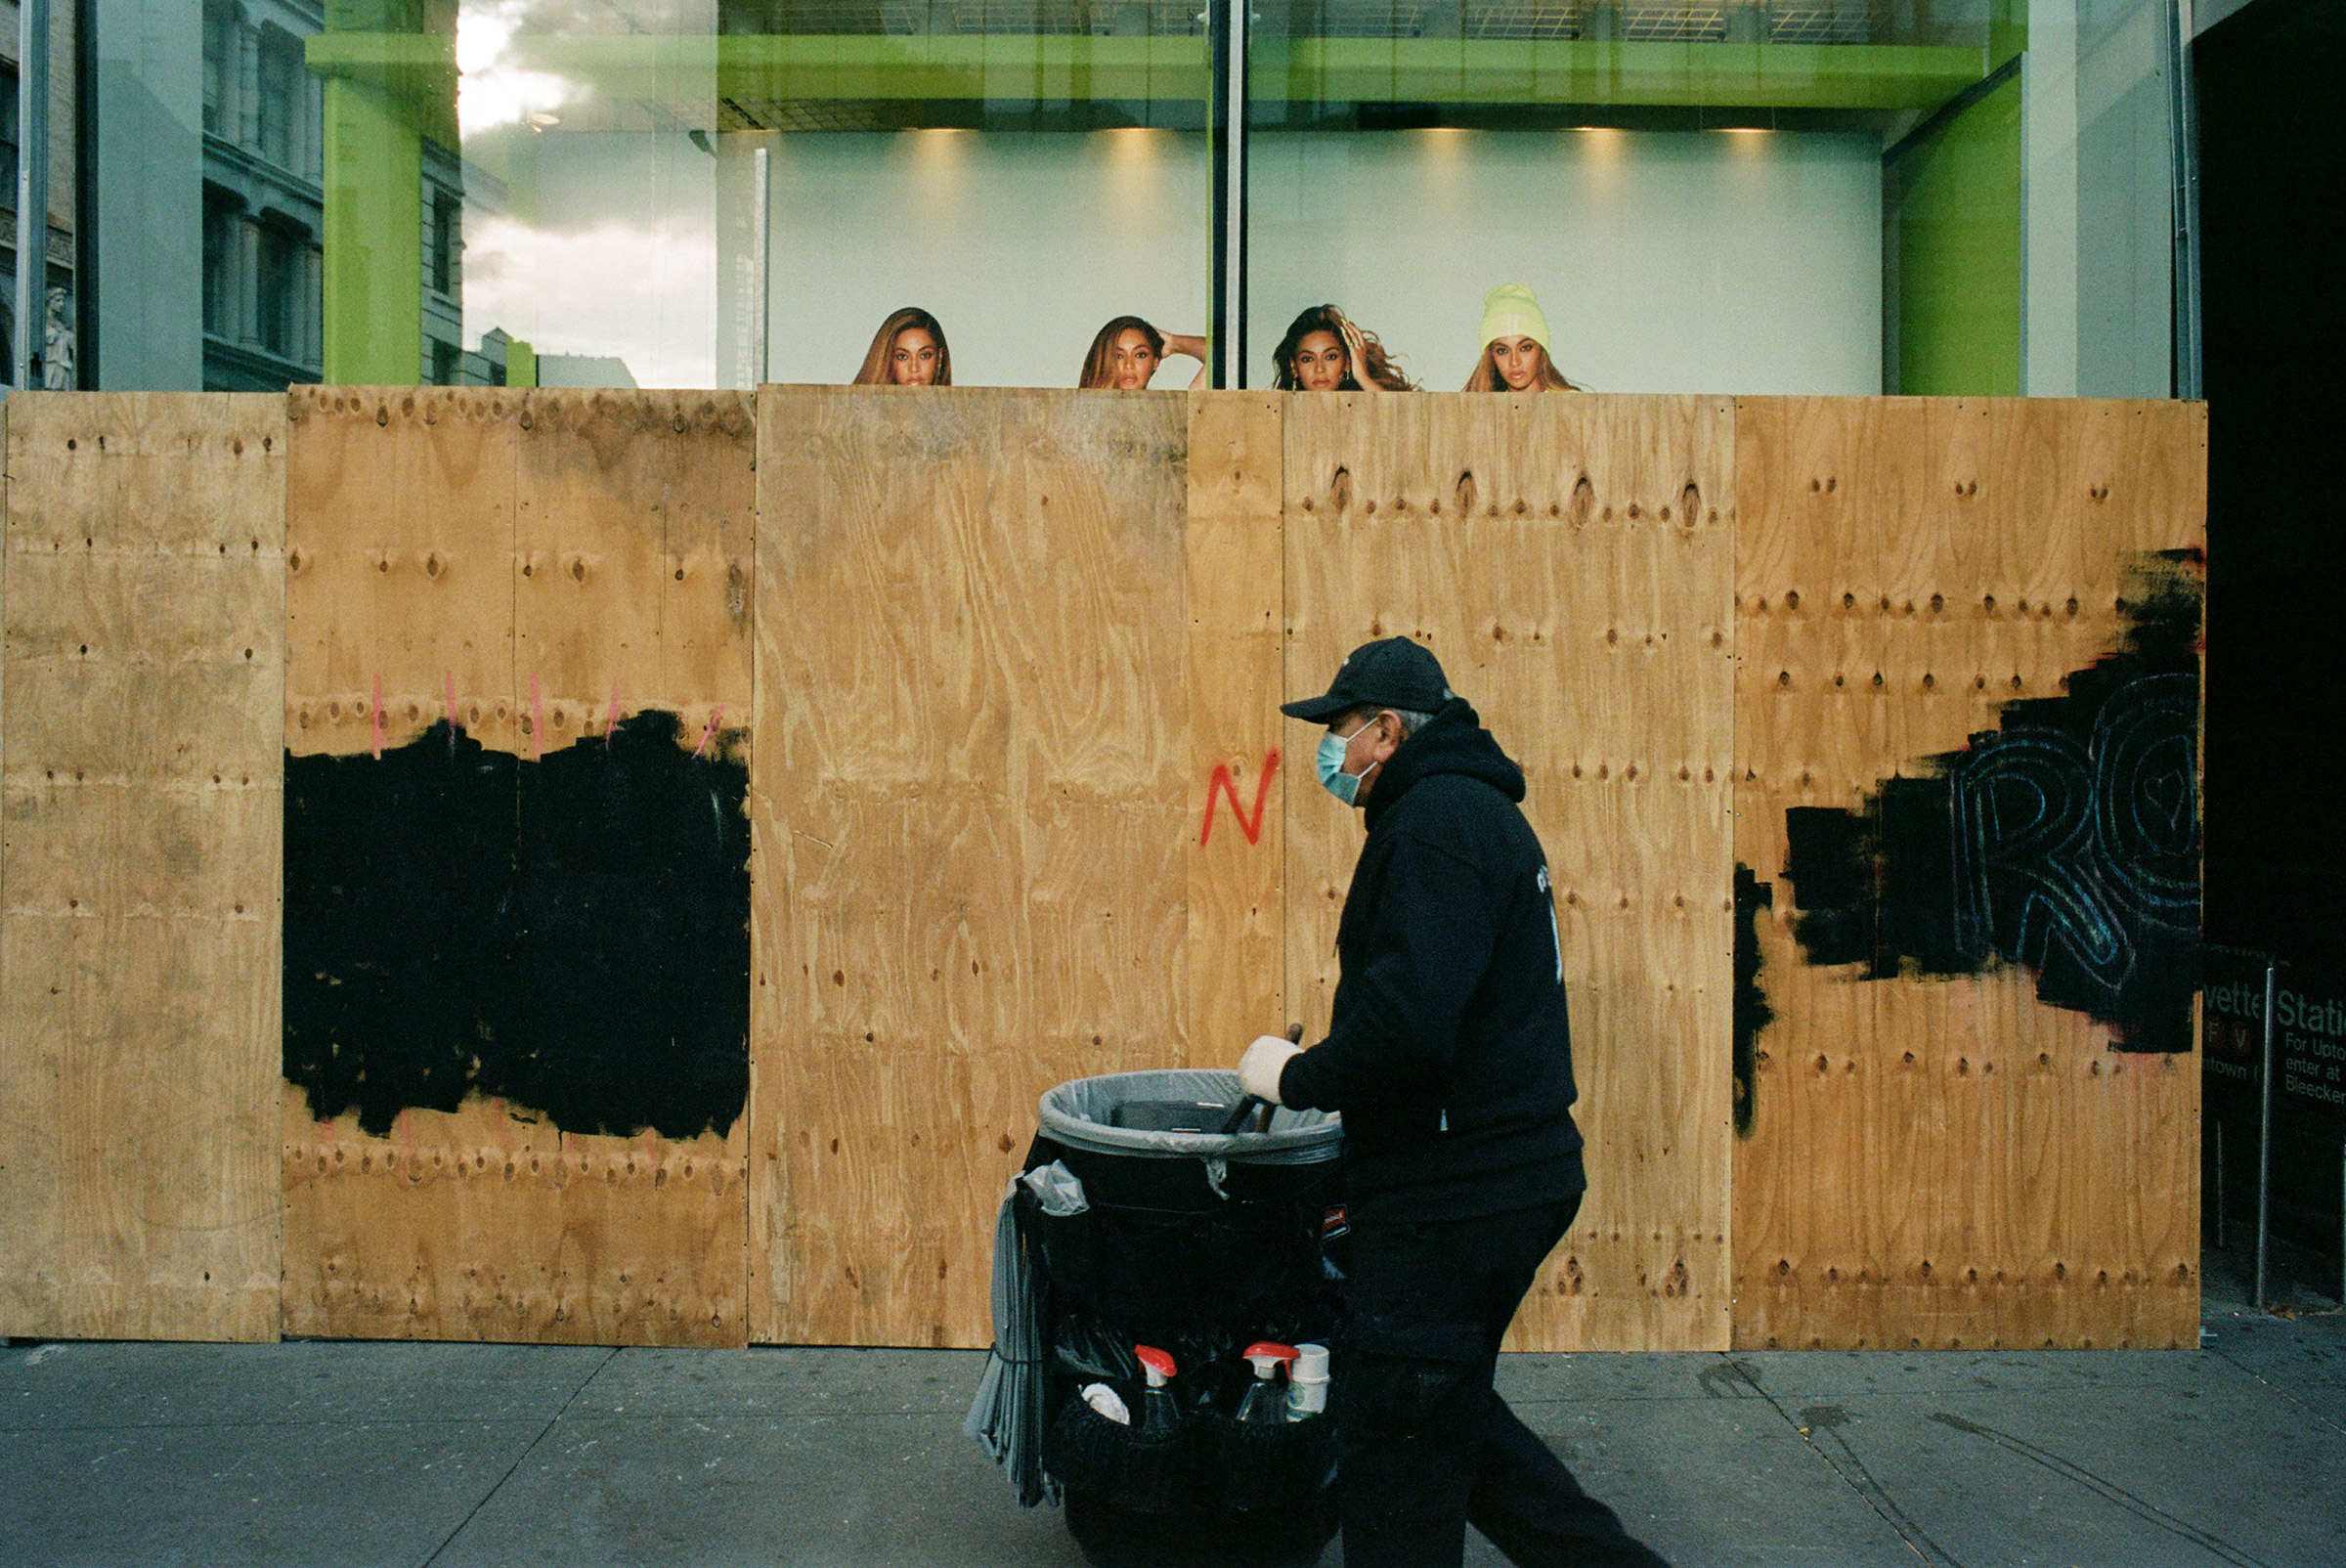 Plywood sprung up around shuttered business and storefront windows Nov. 4, 2020. (Daniel Arnold)